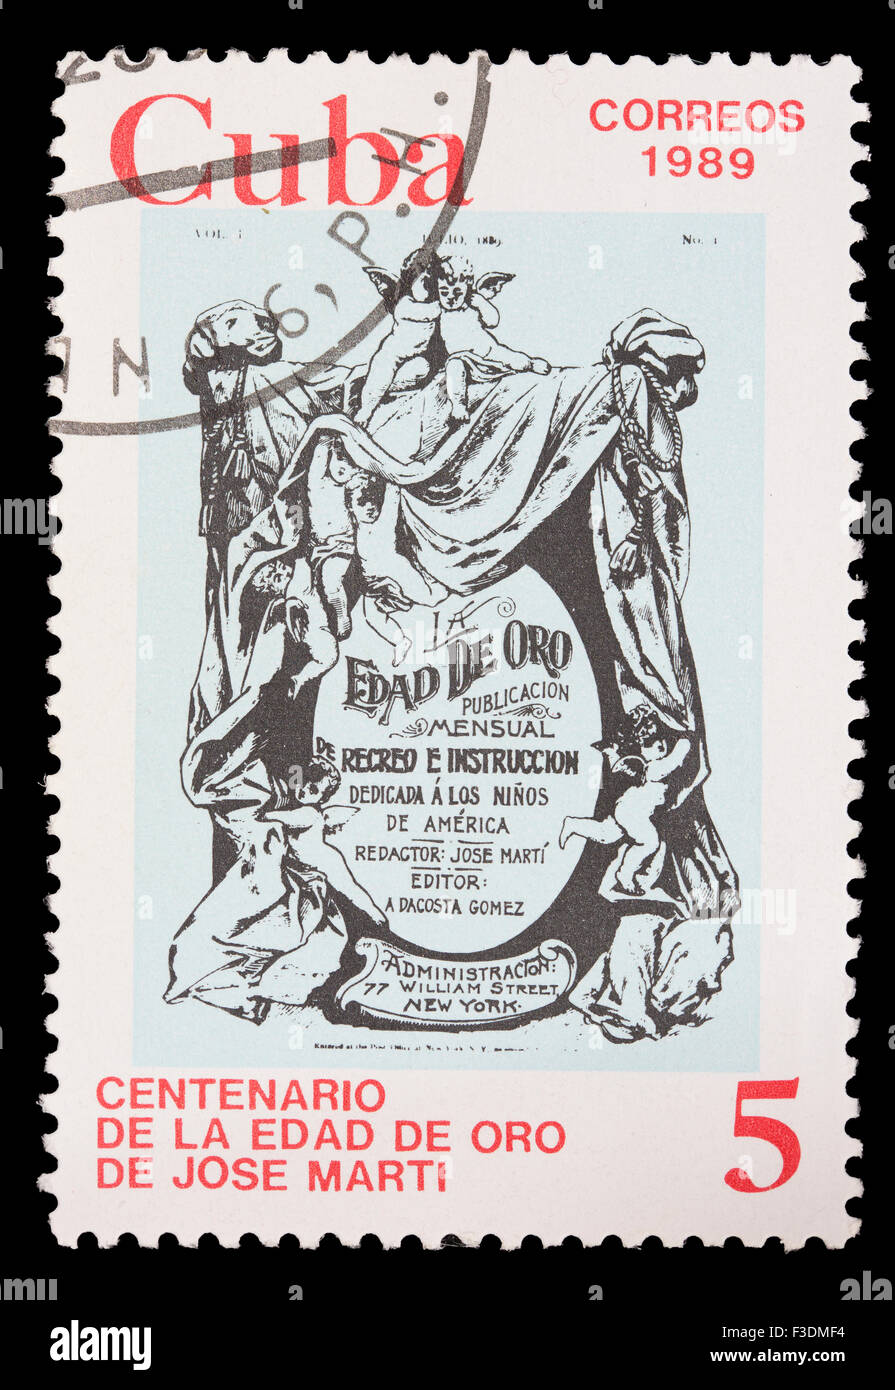 CUBA - CIRCA 1989: A postage stamp printed in Cuba shows the cover of the the Golden Age, the book of Jose Martis , circa 1989 Stock Photo